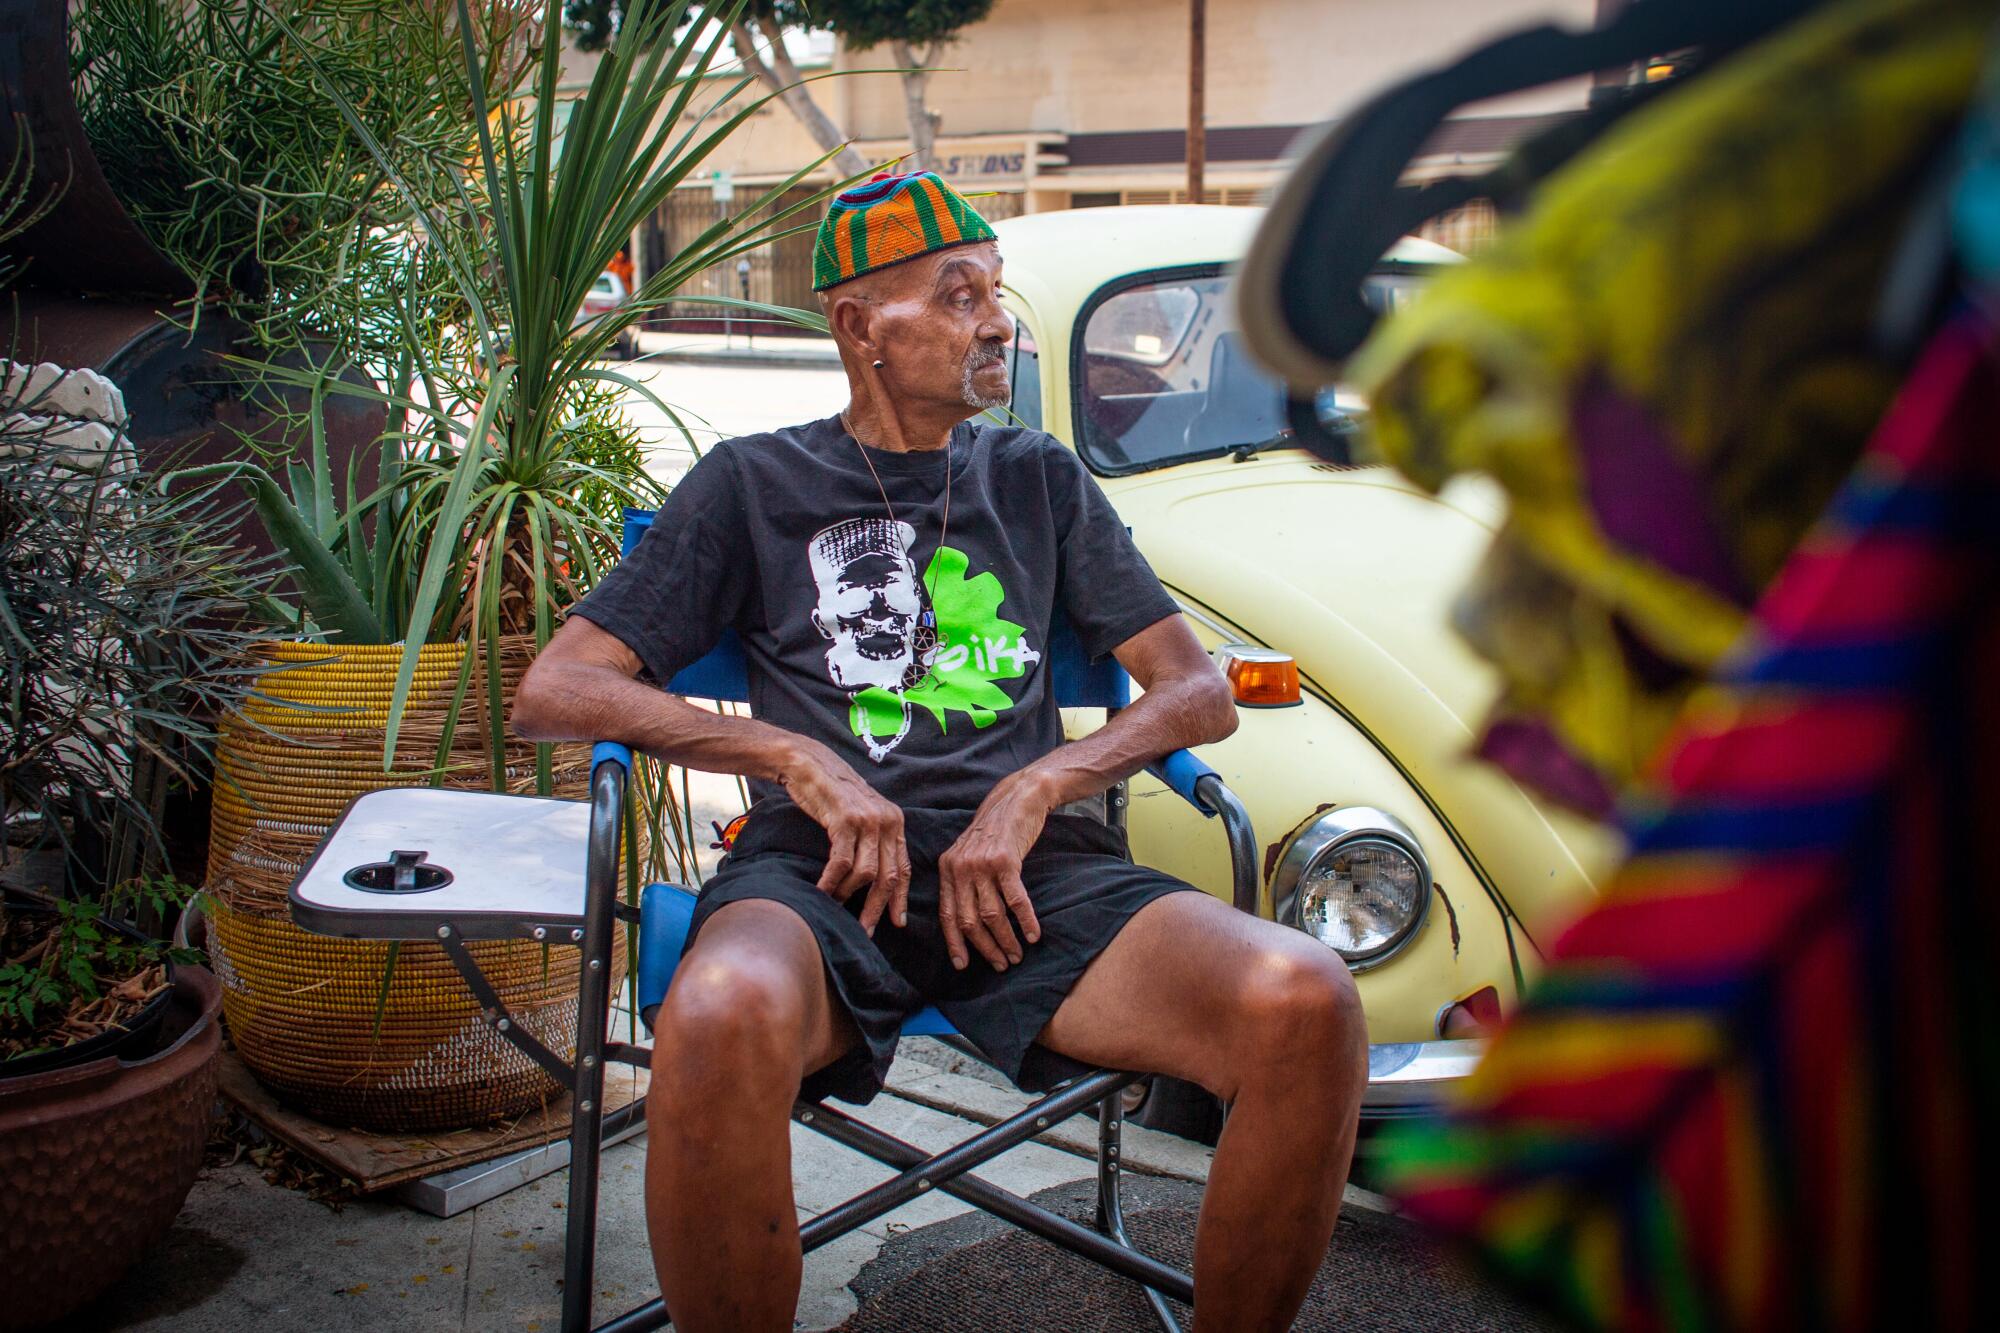 On most days, you can find Sika Dwimfo, 79, sitting outside his namesake store in Leimert Park Village.